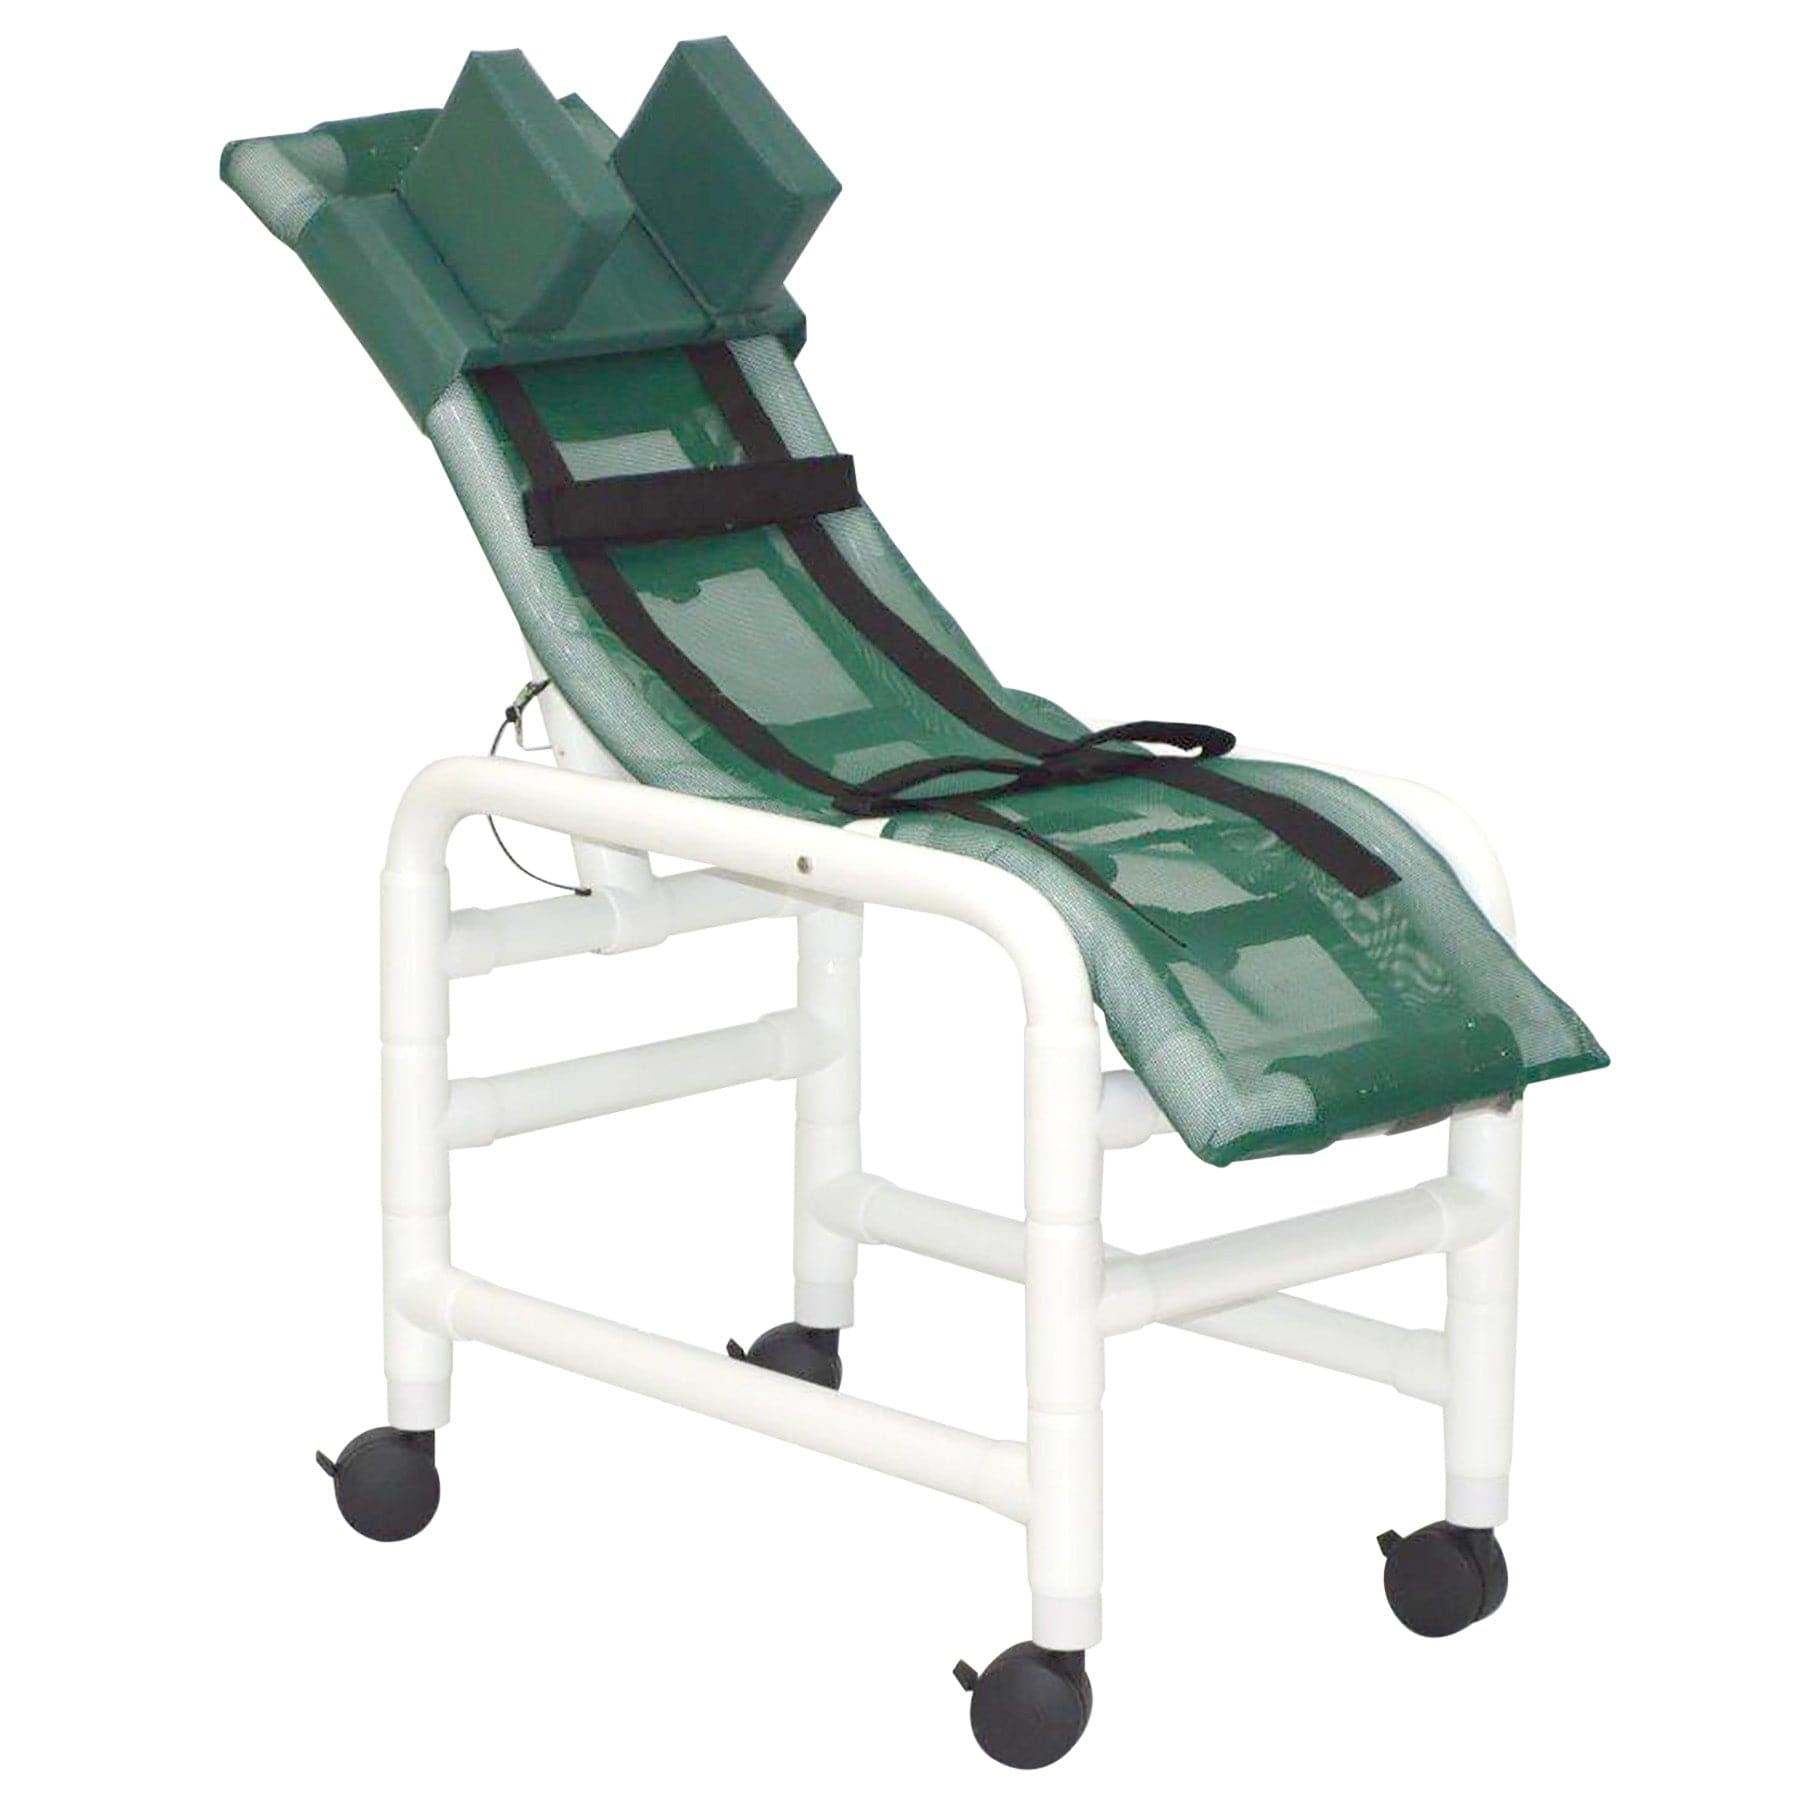 MJM International Pediatric-Reclining Chairs MJM International Medium Reclining Shower Chair With Base Extension, Casters And Head Bolster